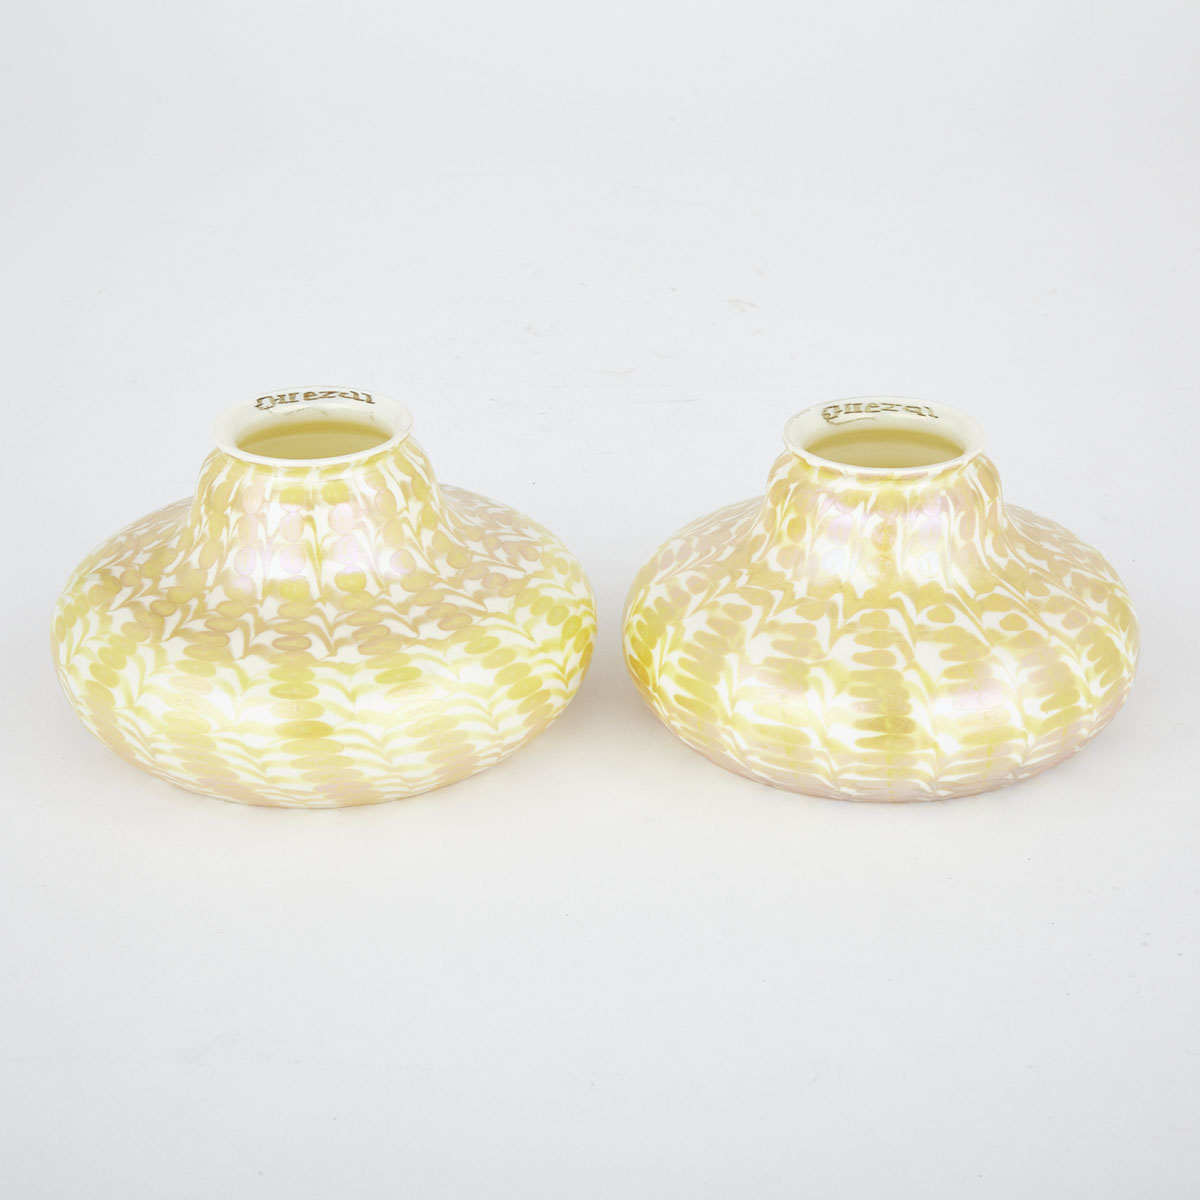 Pair of Quezal Decorated Iridescent Glass Shades, early 20th century